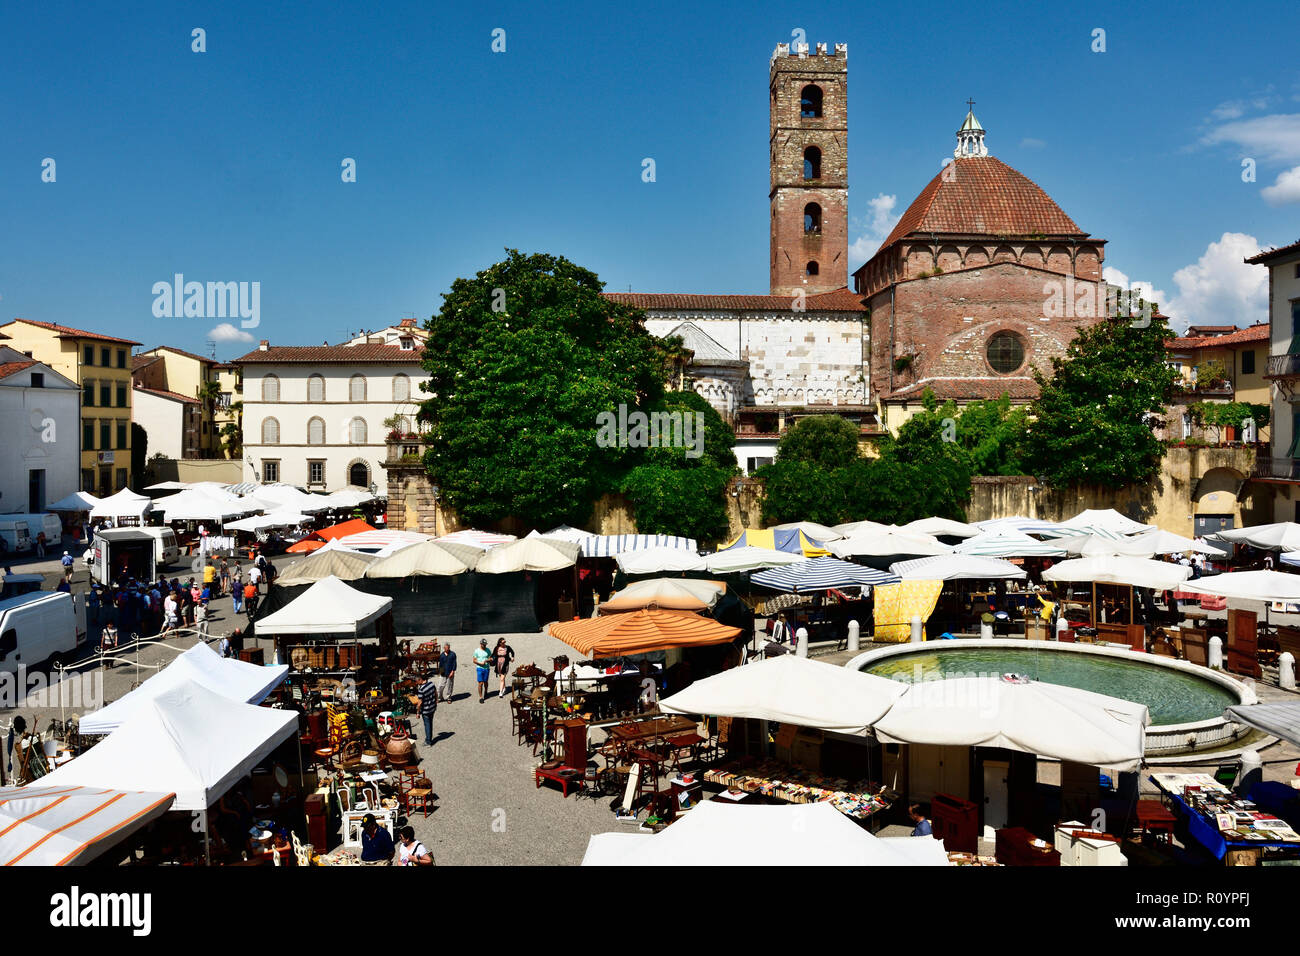 Weekly market in Piazza Antelminelli, In the background, the church of Saint Giovanni, Lucca, Province of Lucca, Tuscany, Italy, Europe Stock Photo